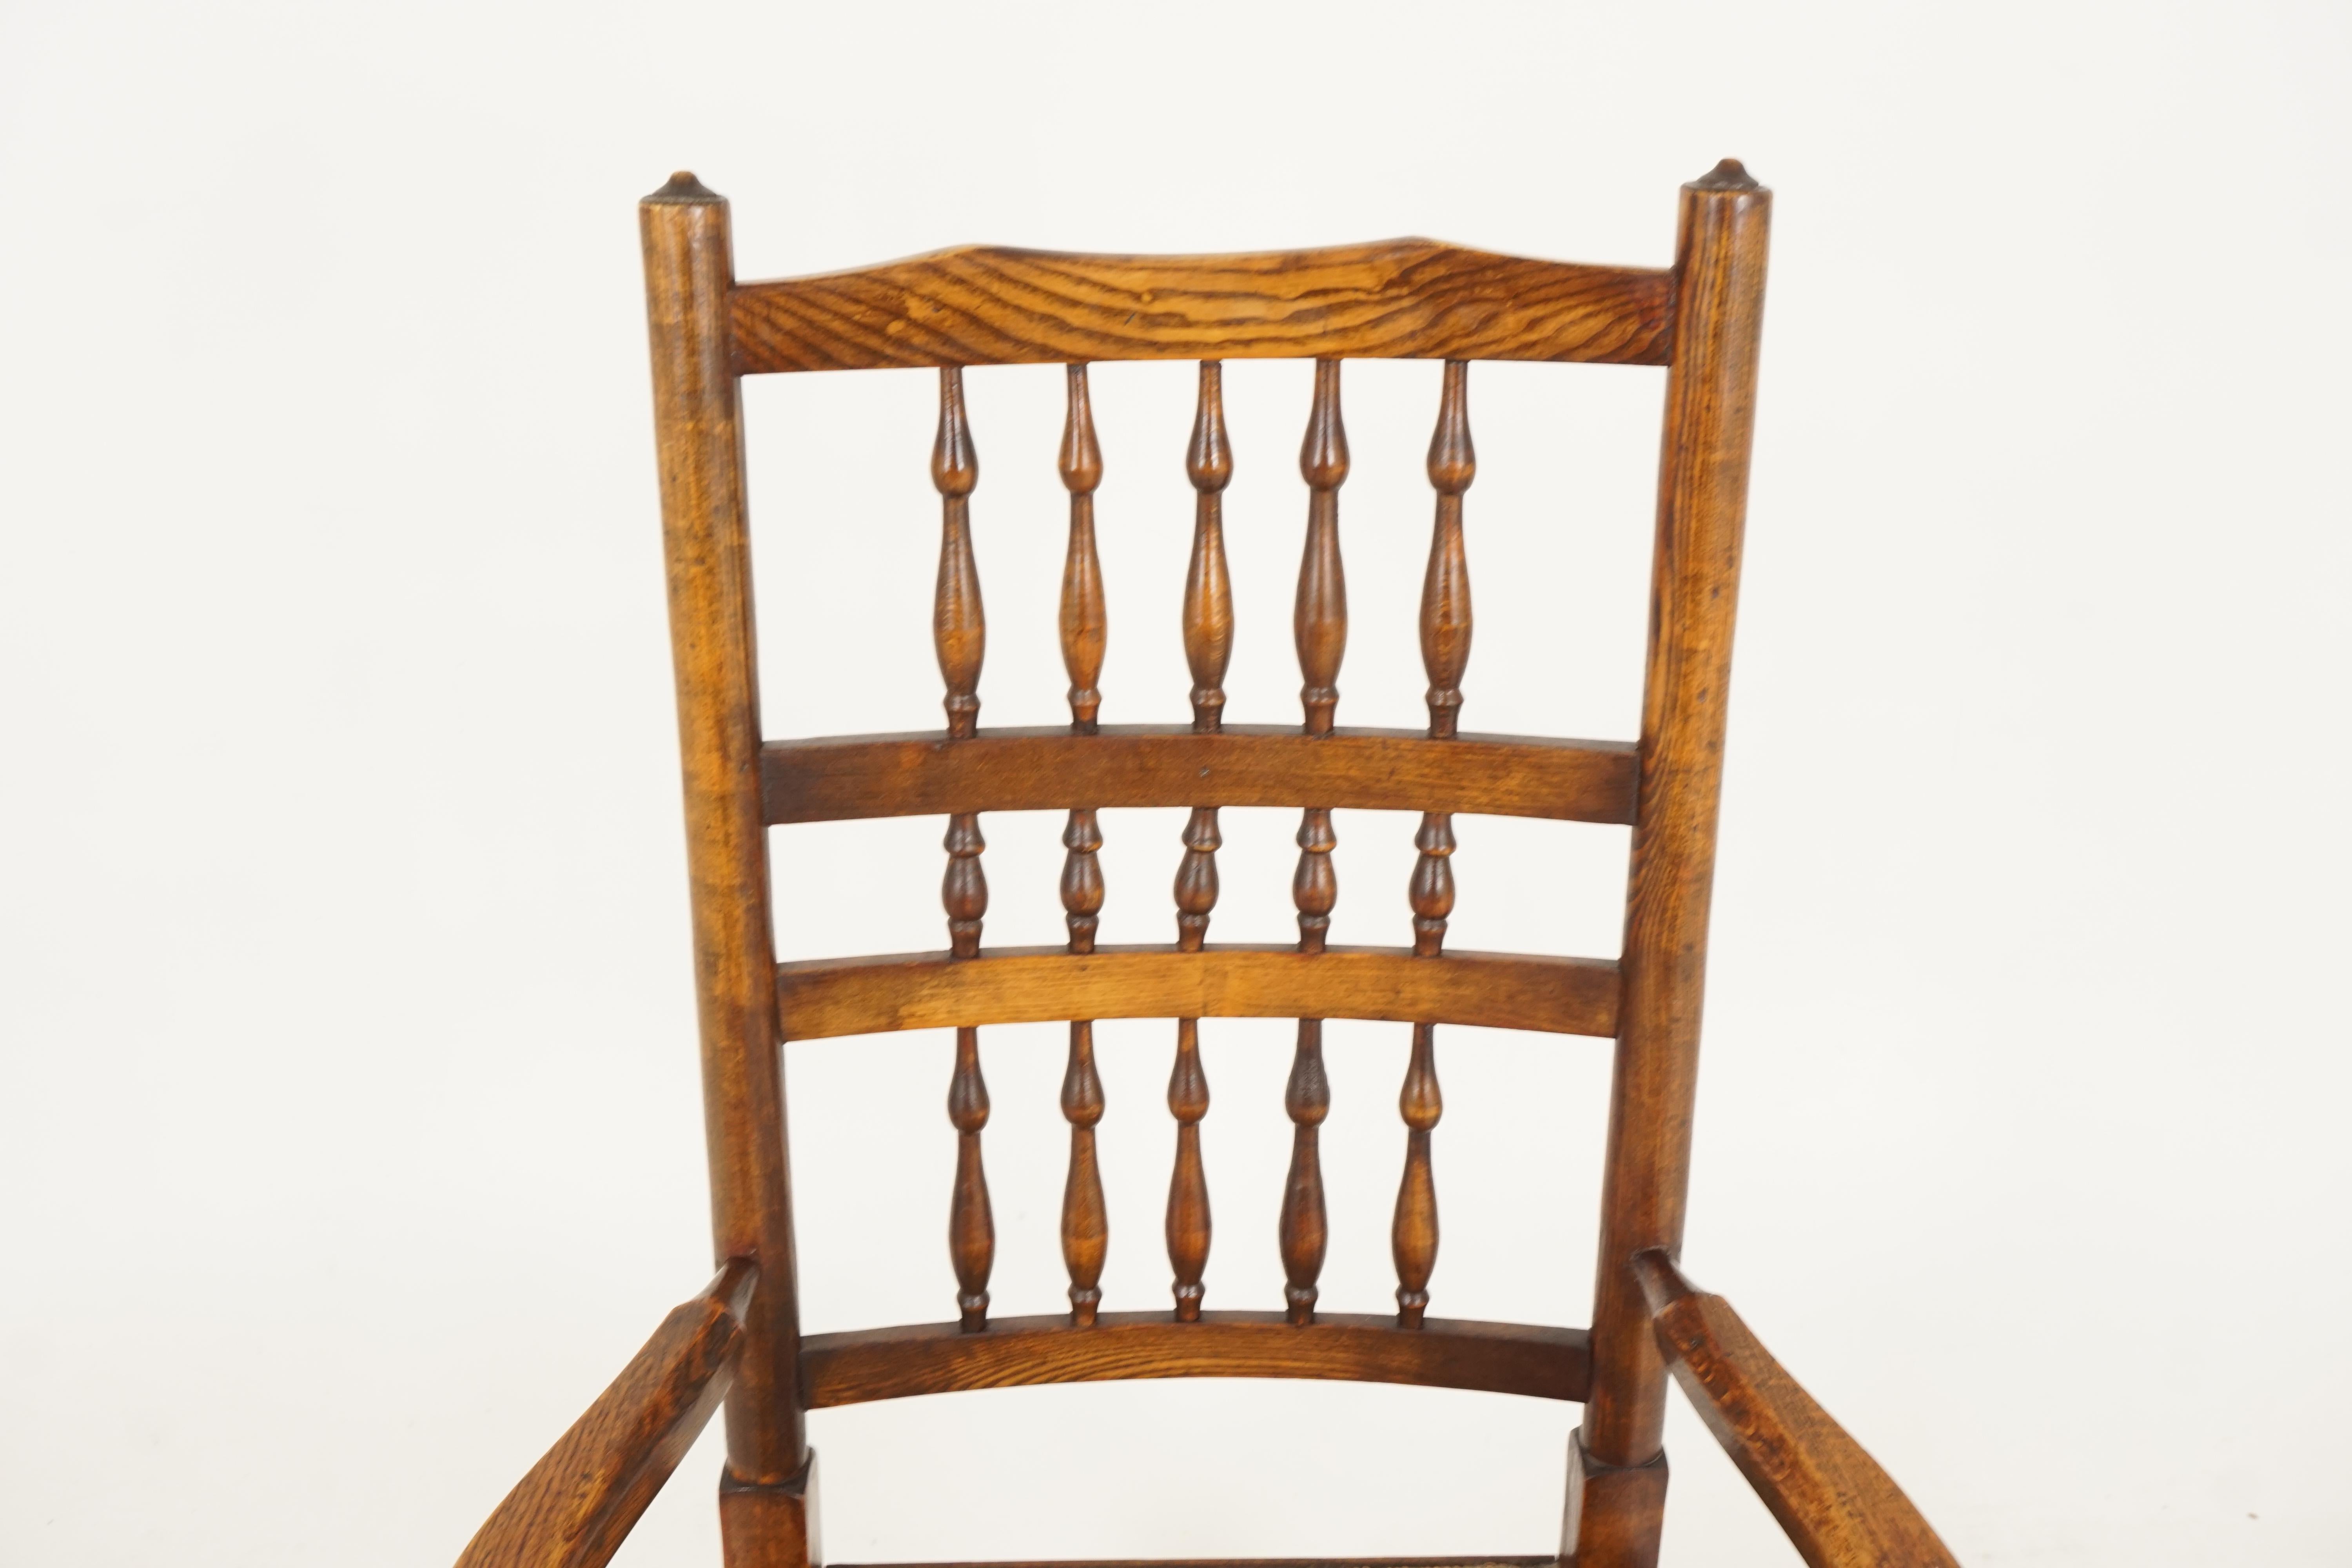 English 6 Antique Rush Seated Chairs, Country Lancashire Farmhouse, Spindle Back Chairs